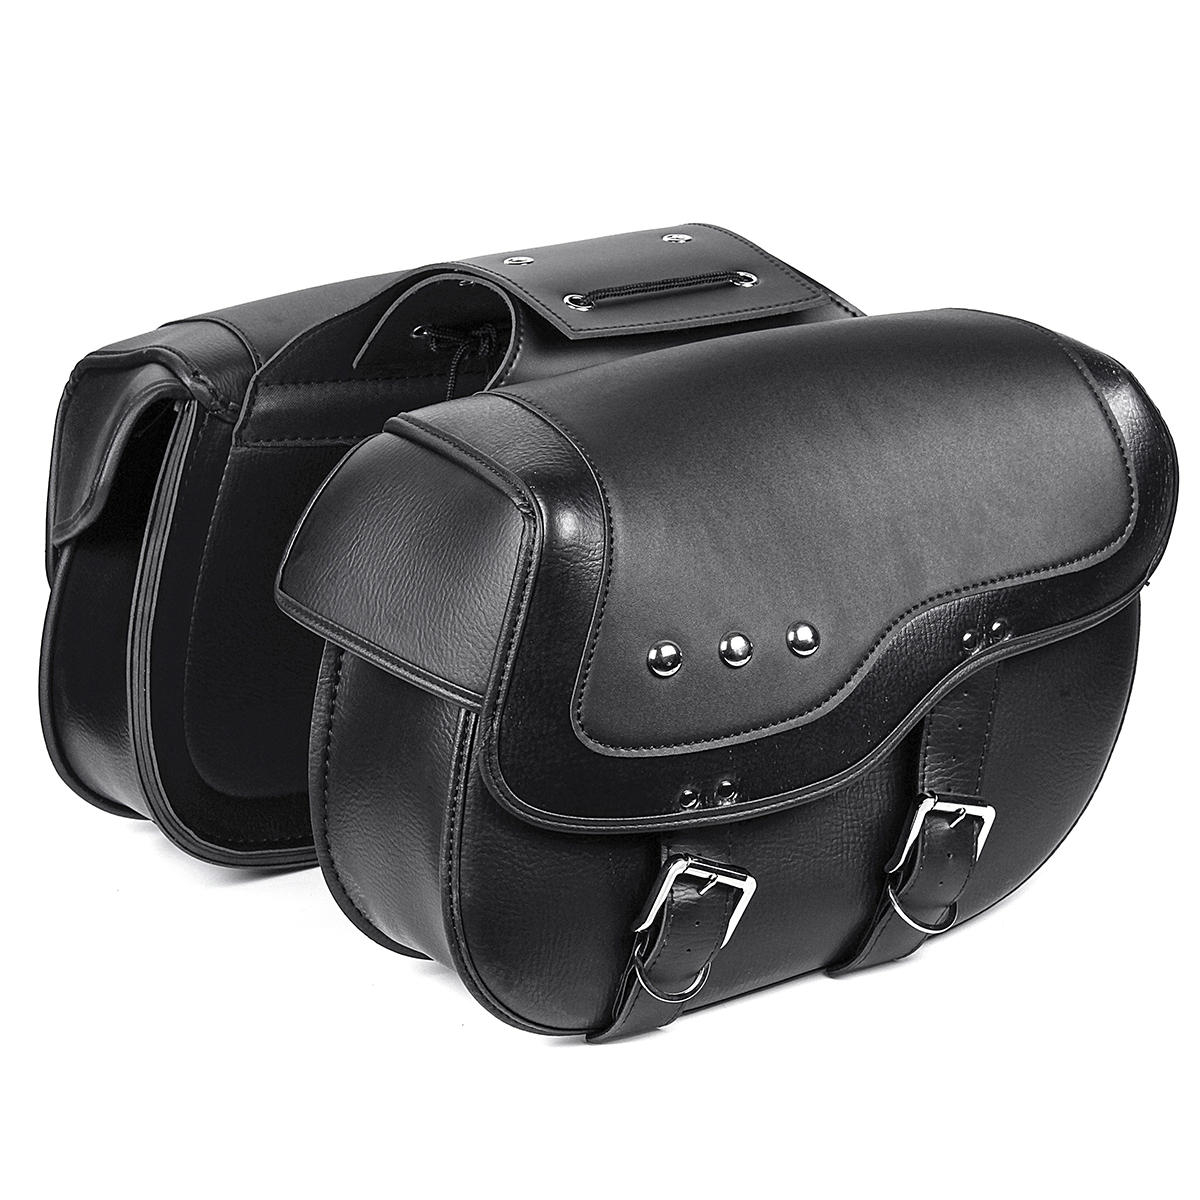 Image of Motorcycle PU Leather Luggage Saddlebags Black For Sportster XL883 1200